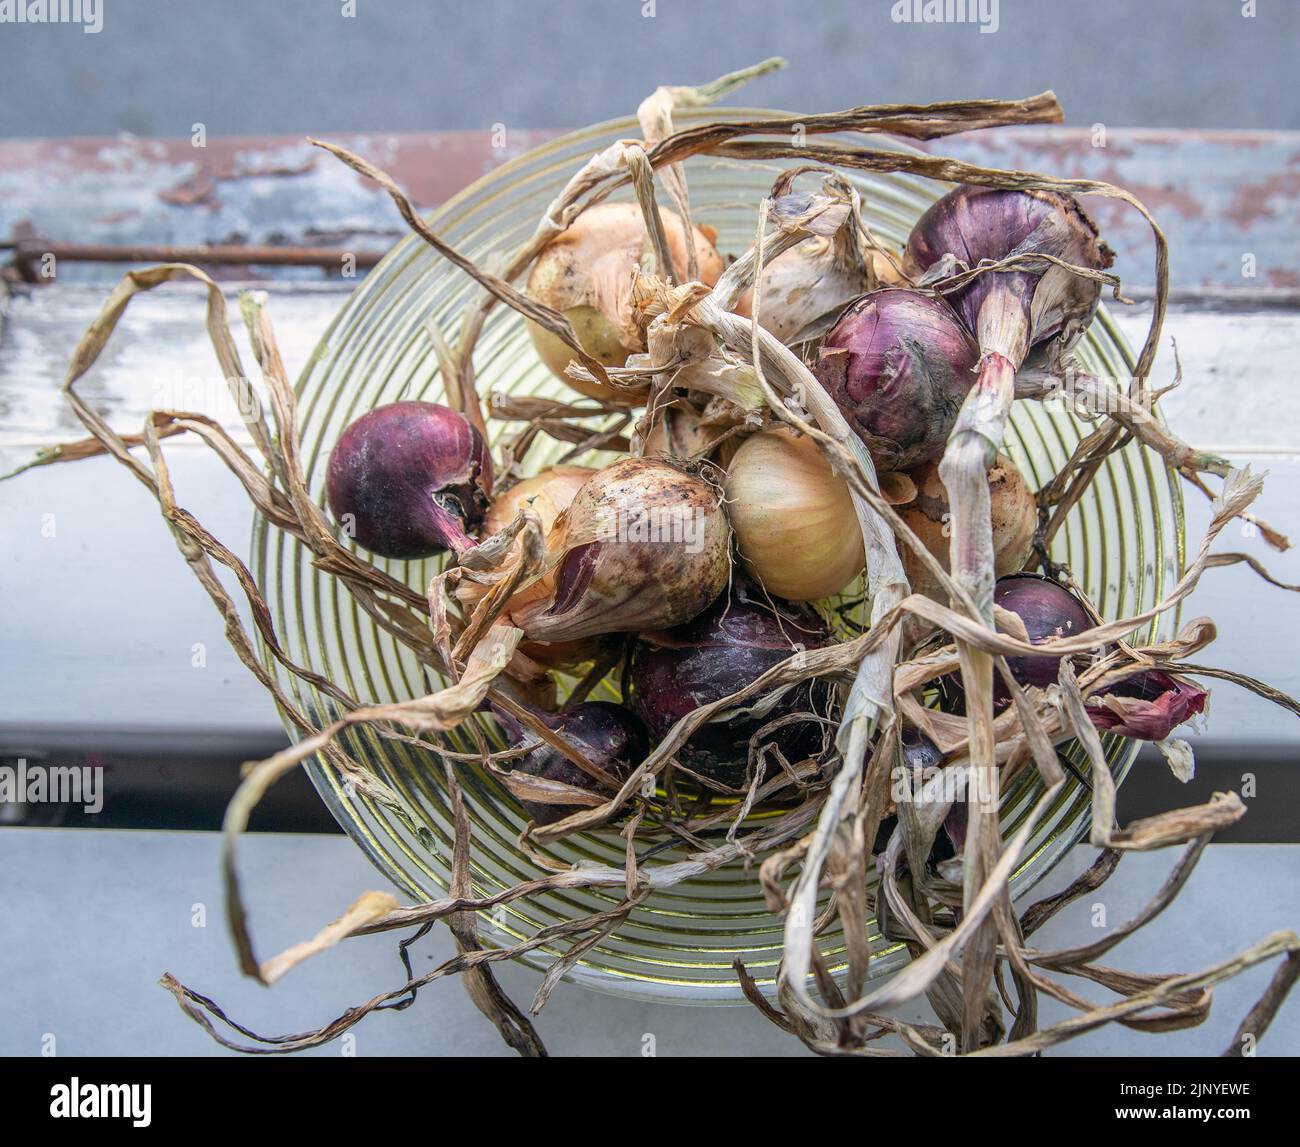 Red and yellow onions to dry in a window sill. Stock Photo